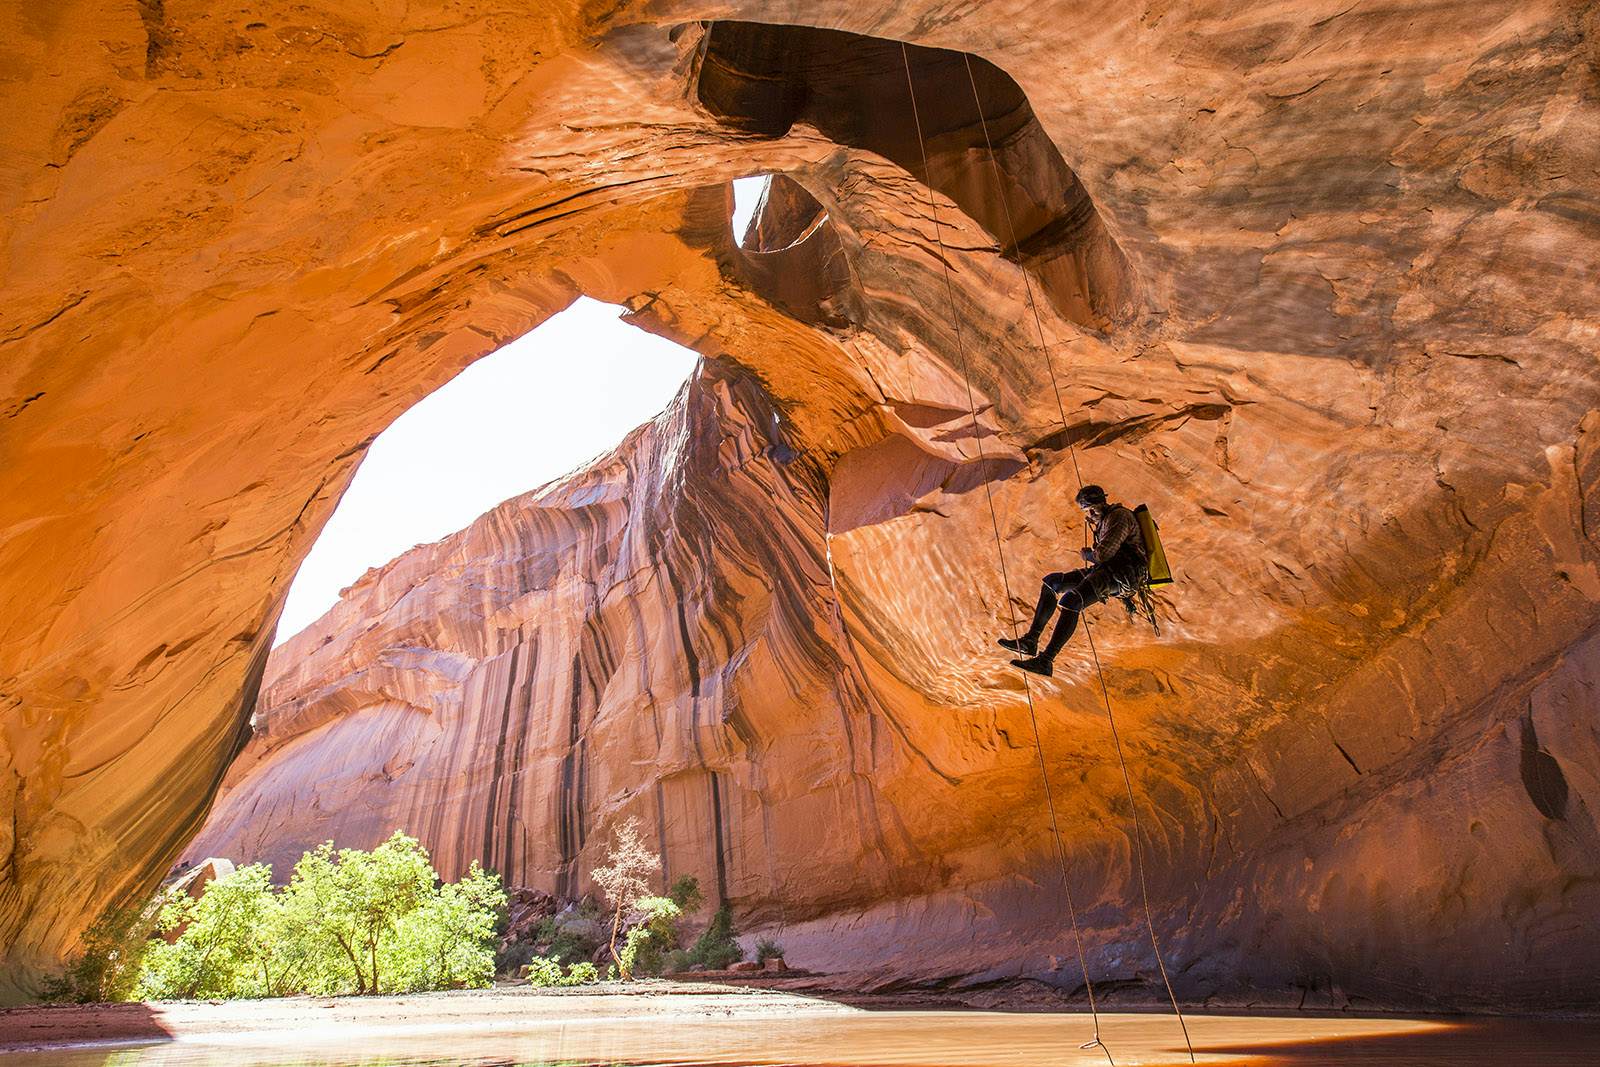 Where are the best slot canyons